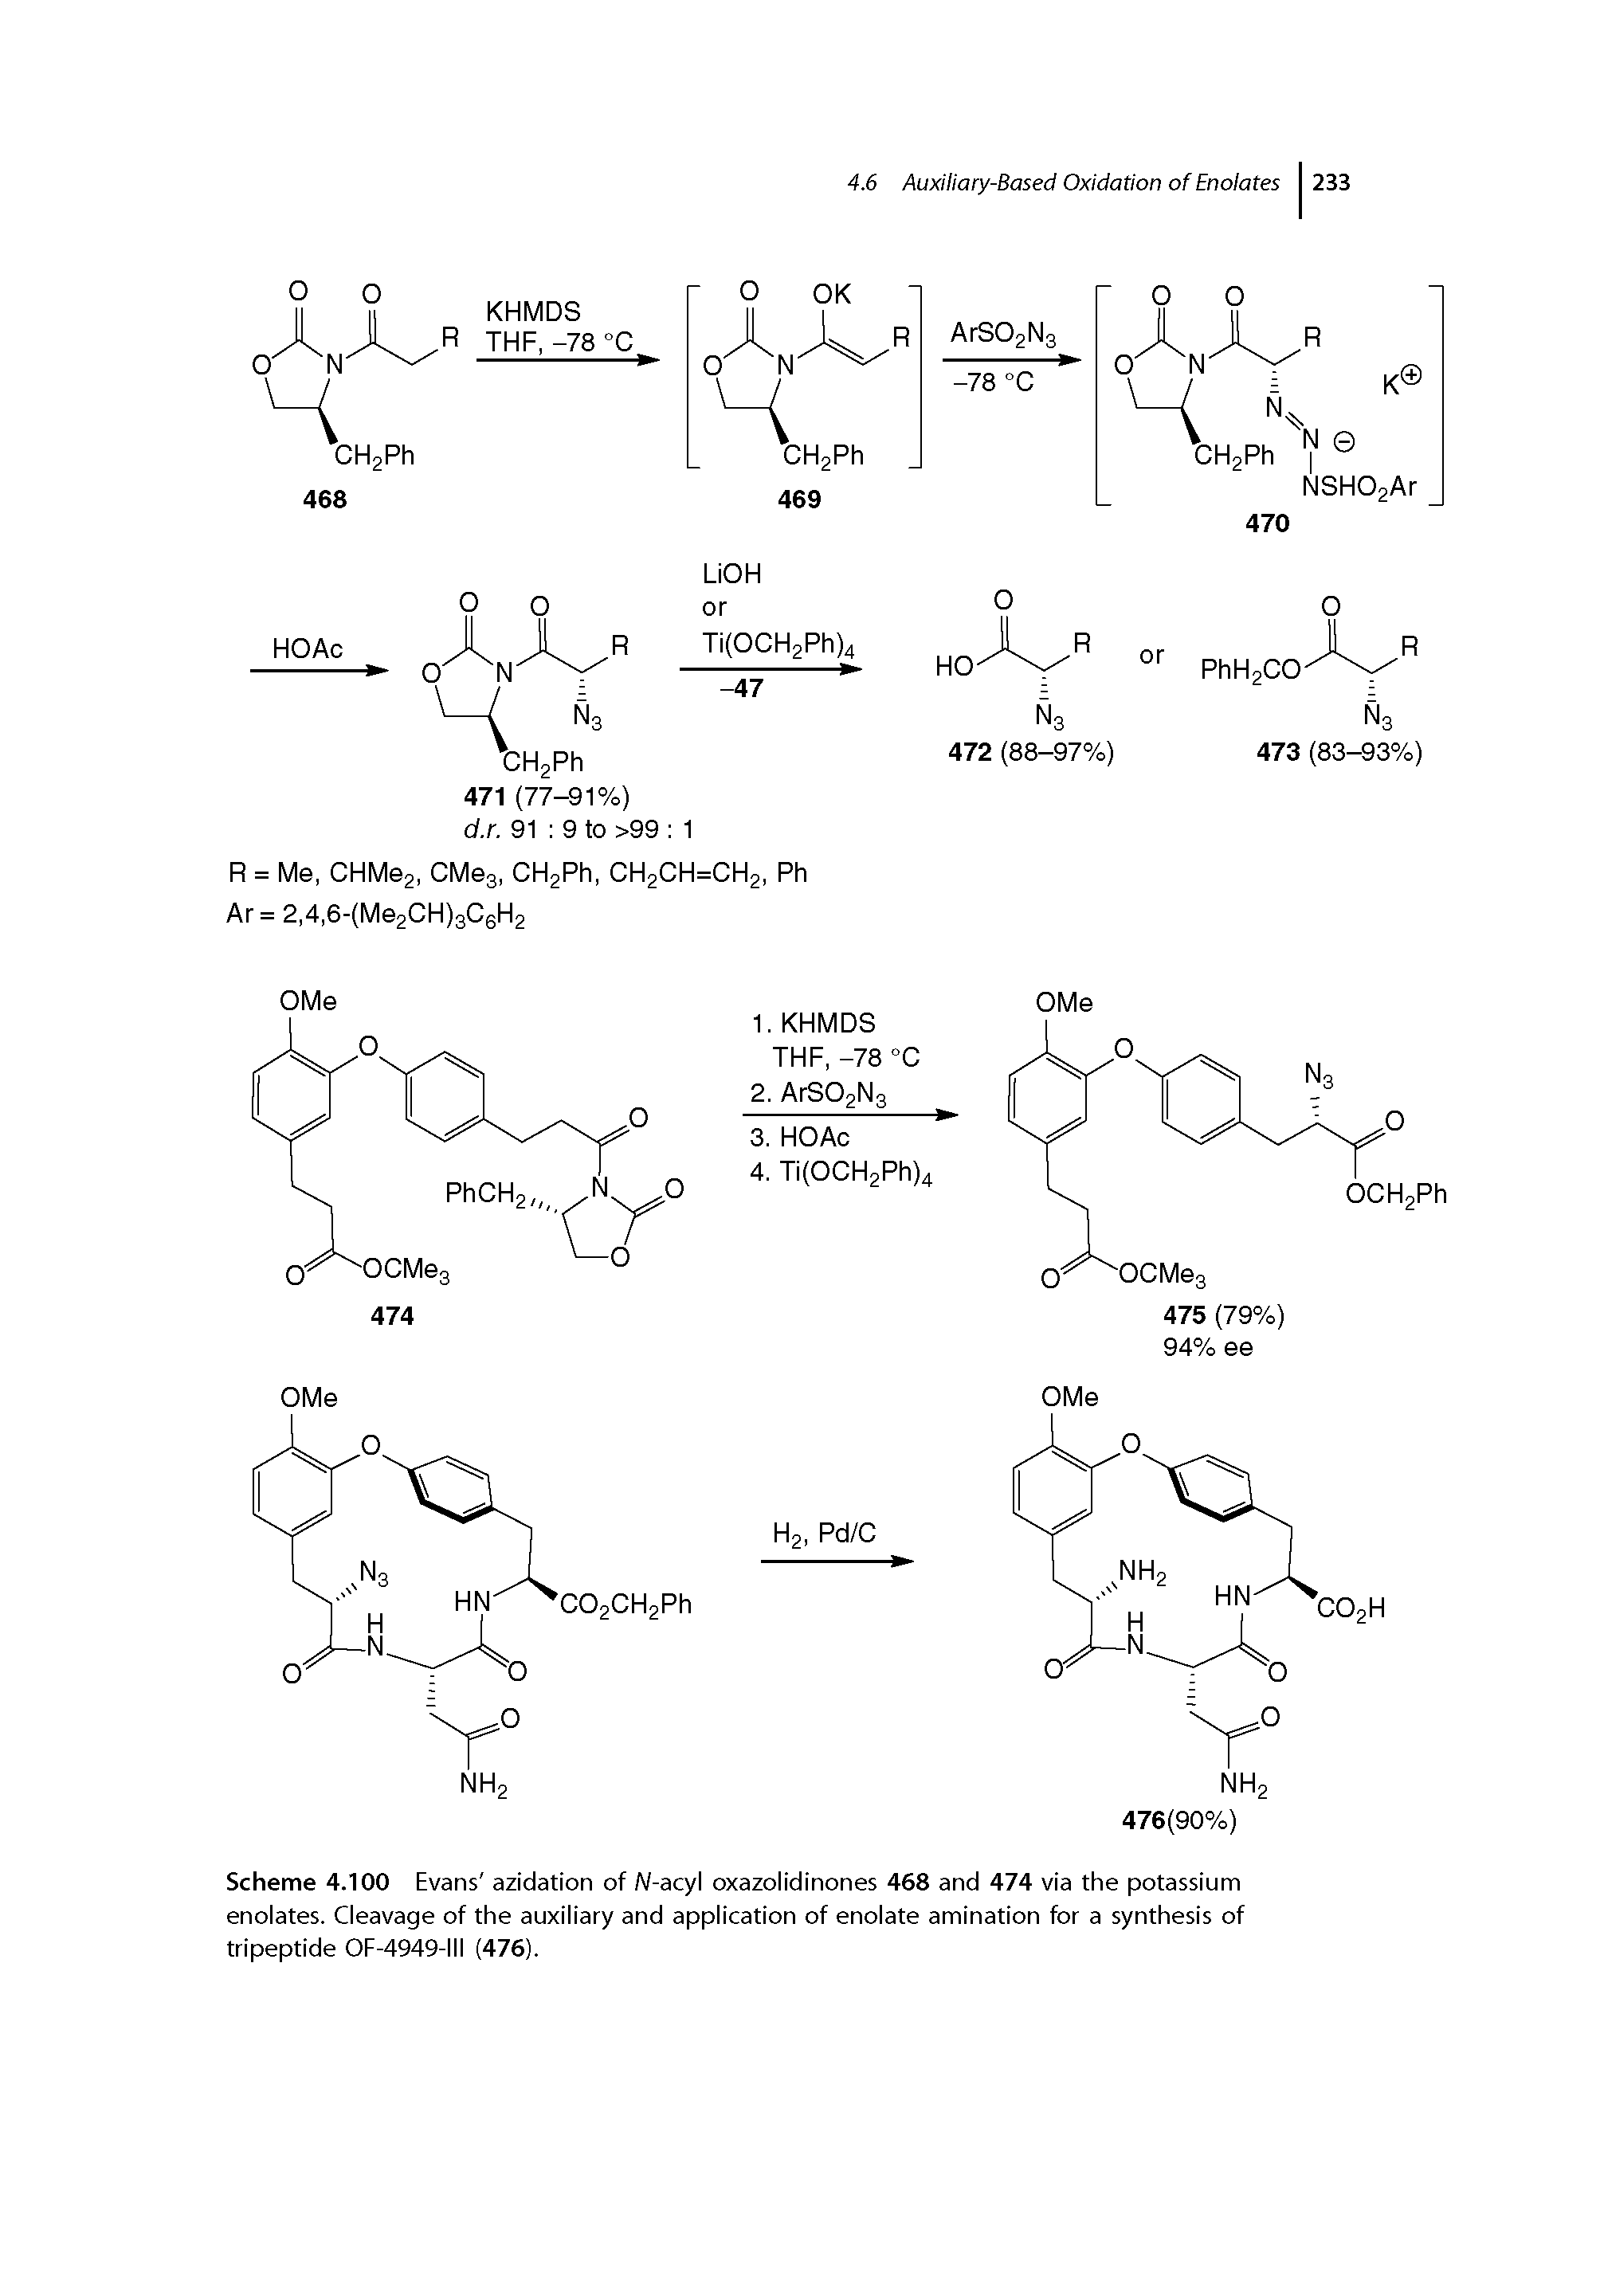 Scheme 4.100 Evans azidation of W-acyl oxazolidinones 468 and 474 via the potassium enolates. Cleavage of the auxiliary and application of enolate amination for a synthesis of tripeptide OF-4949-III (476).